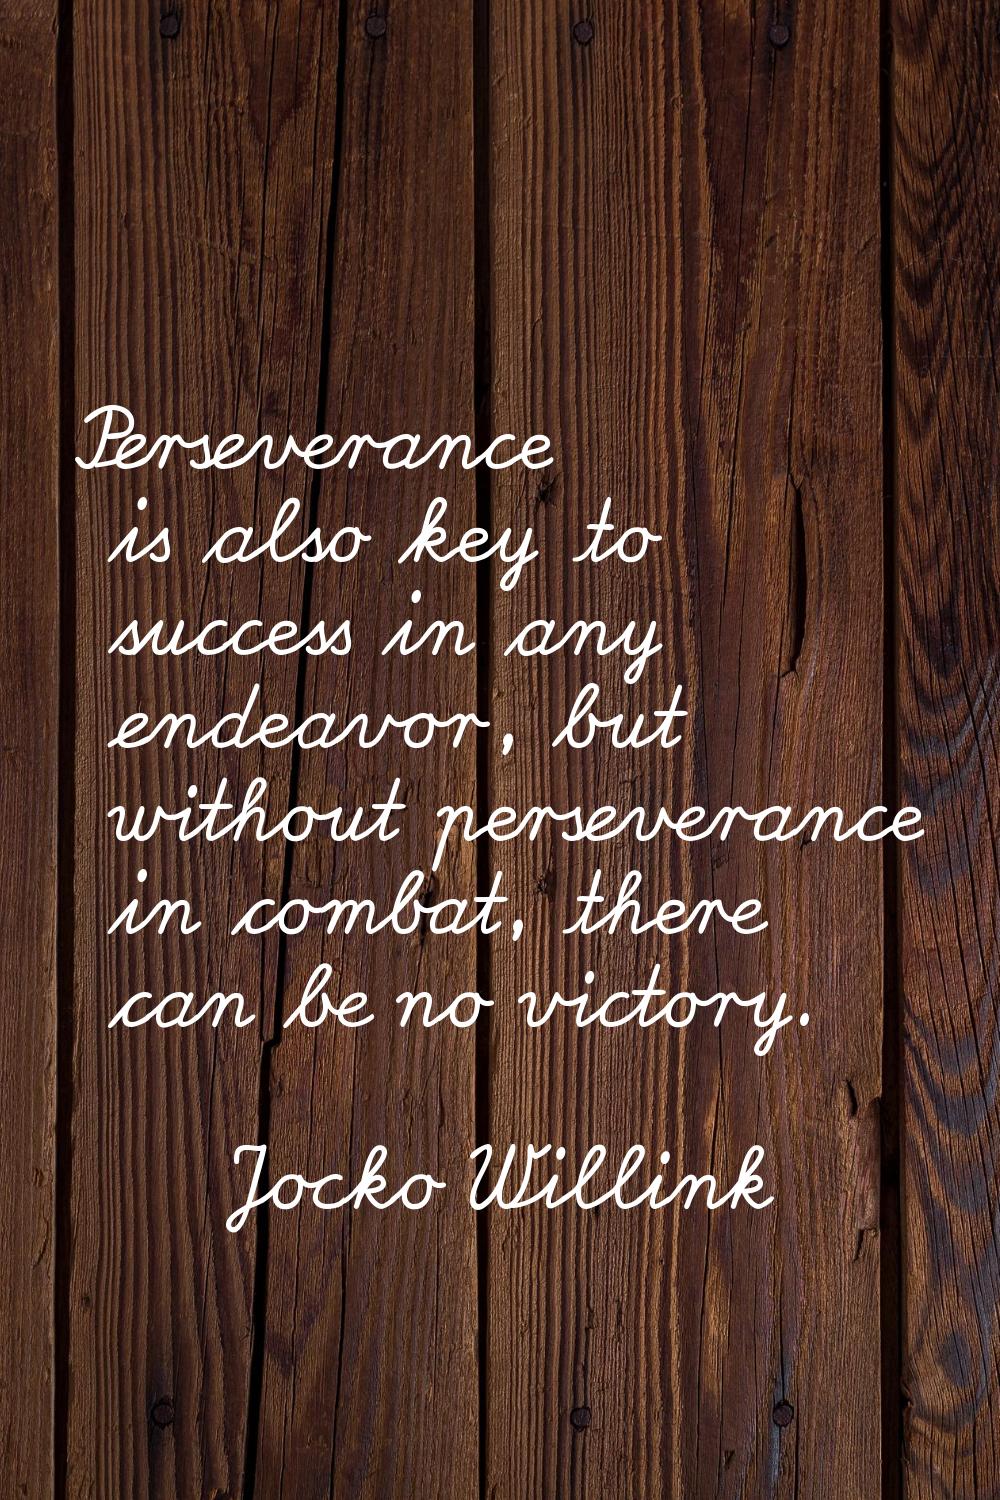 Perseverance is also key to success in any endeavor, but without perseverance in combat, there can 